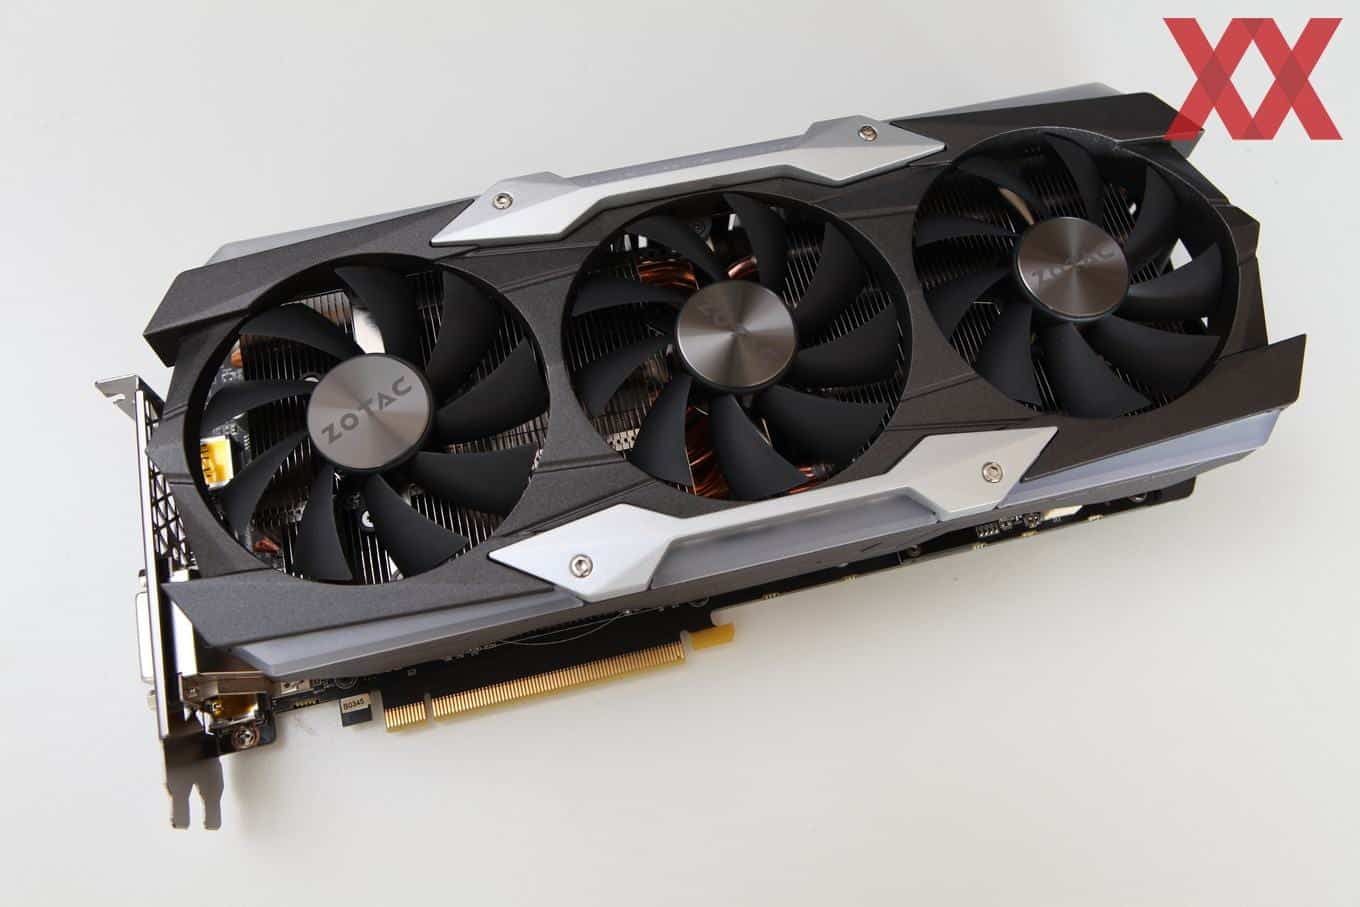 Full review of the Zotac GTX 1080 Ti AMP graphics card! Extreme Edition in  a German environment - HardwarEsfera